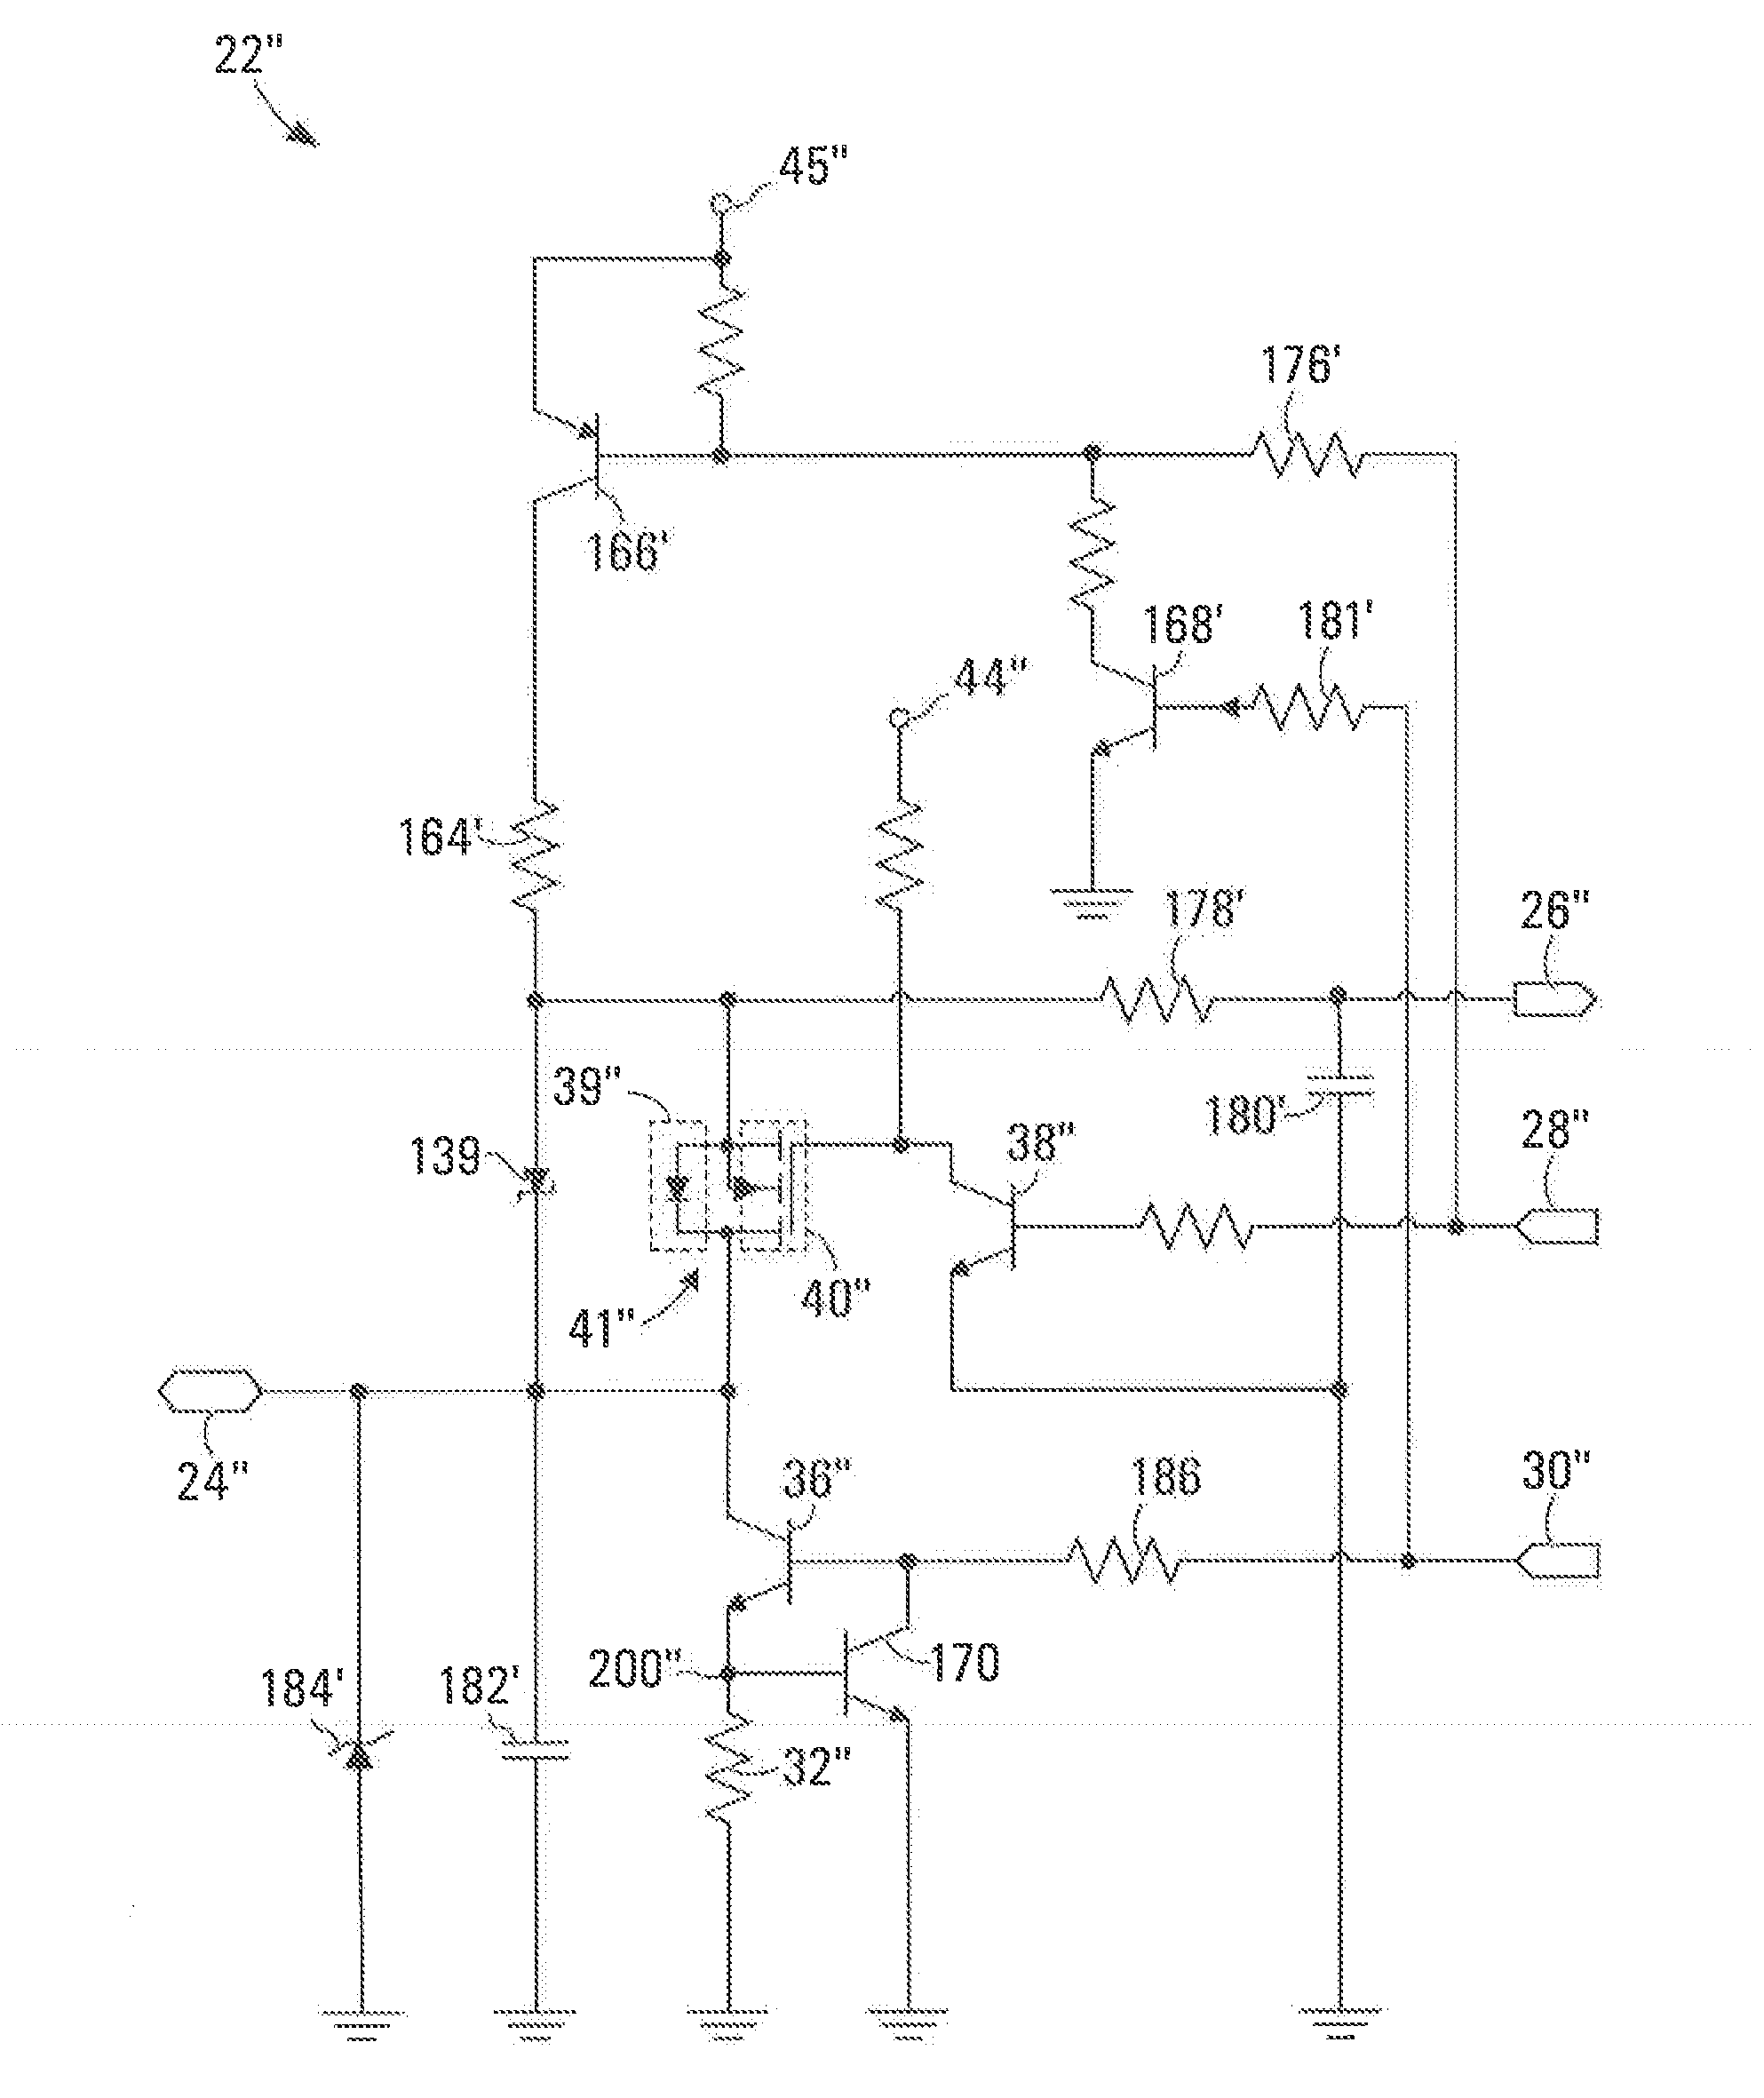 Input/output interface circuit with overpower protection